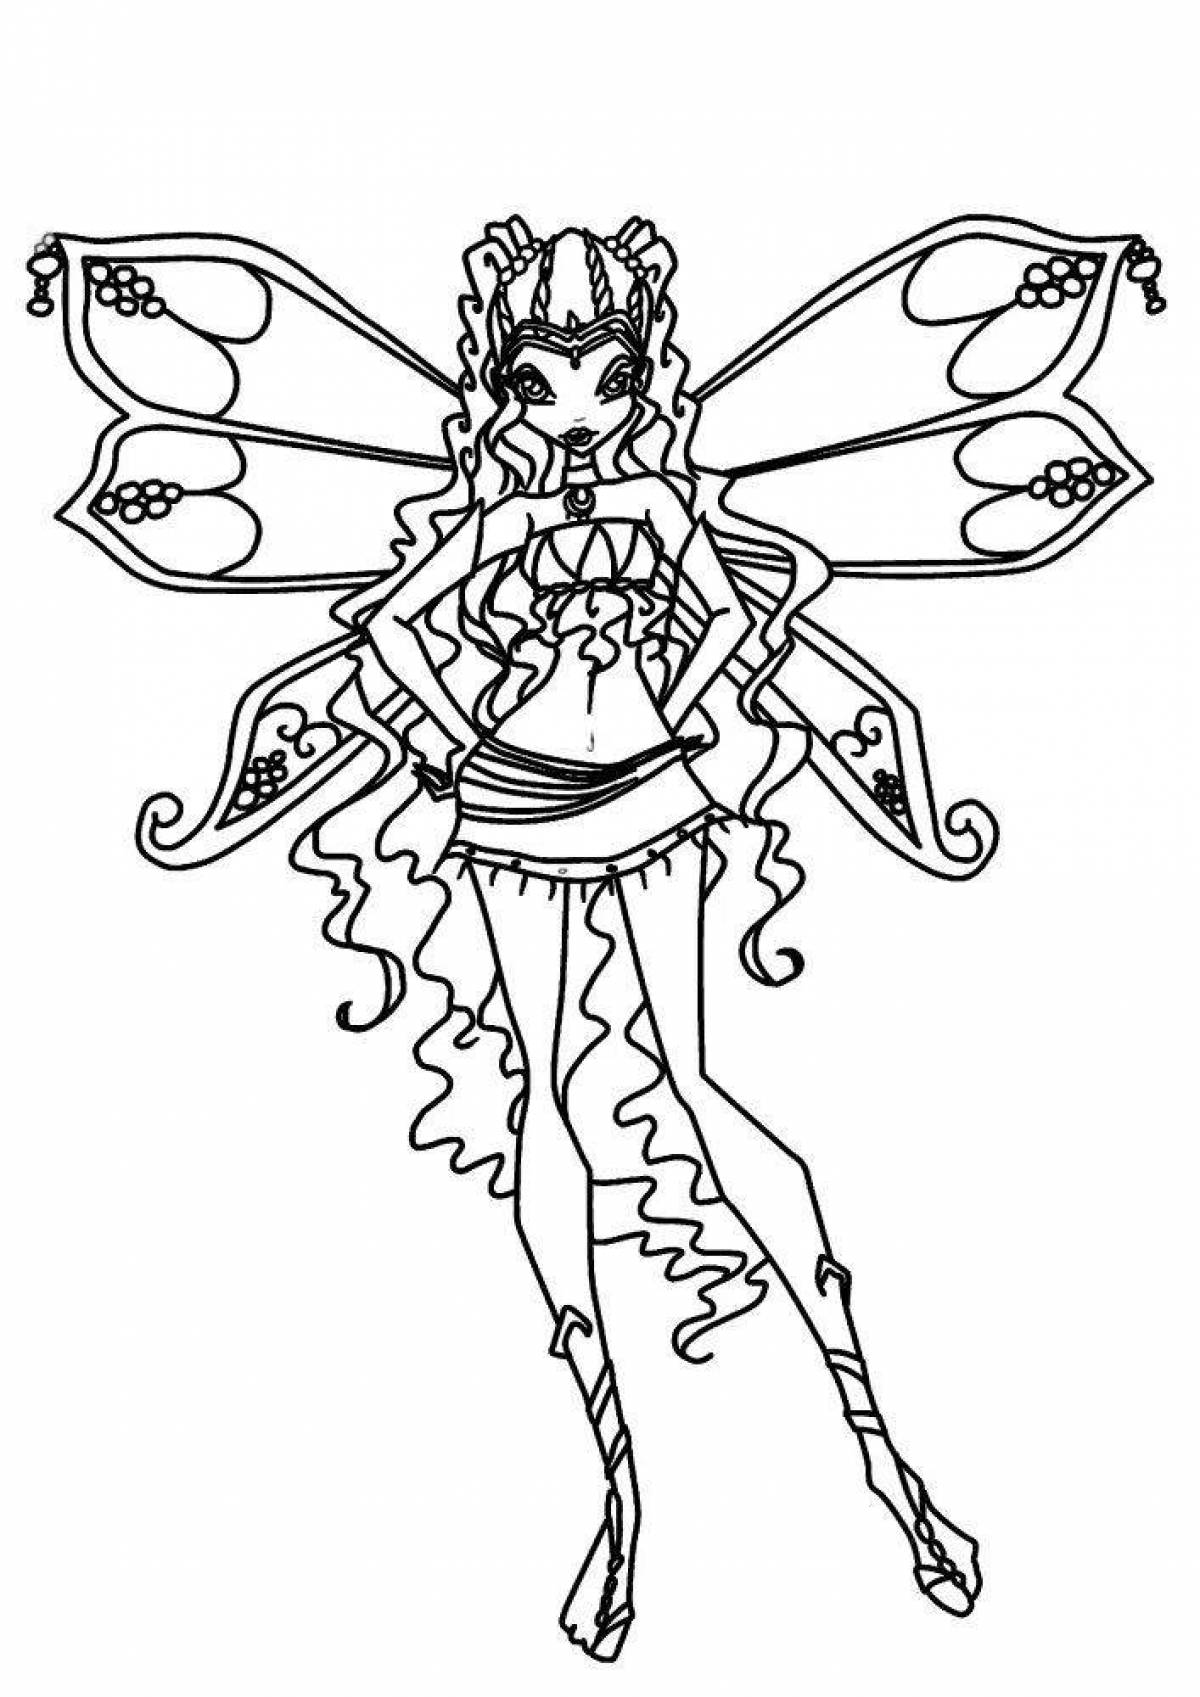 Playful winx coloring page